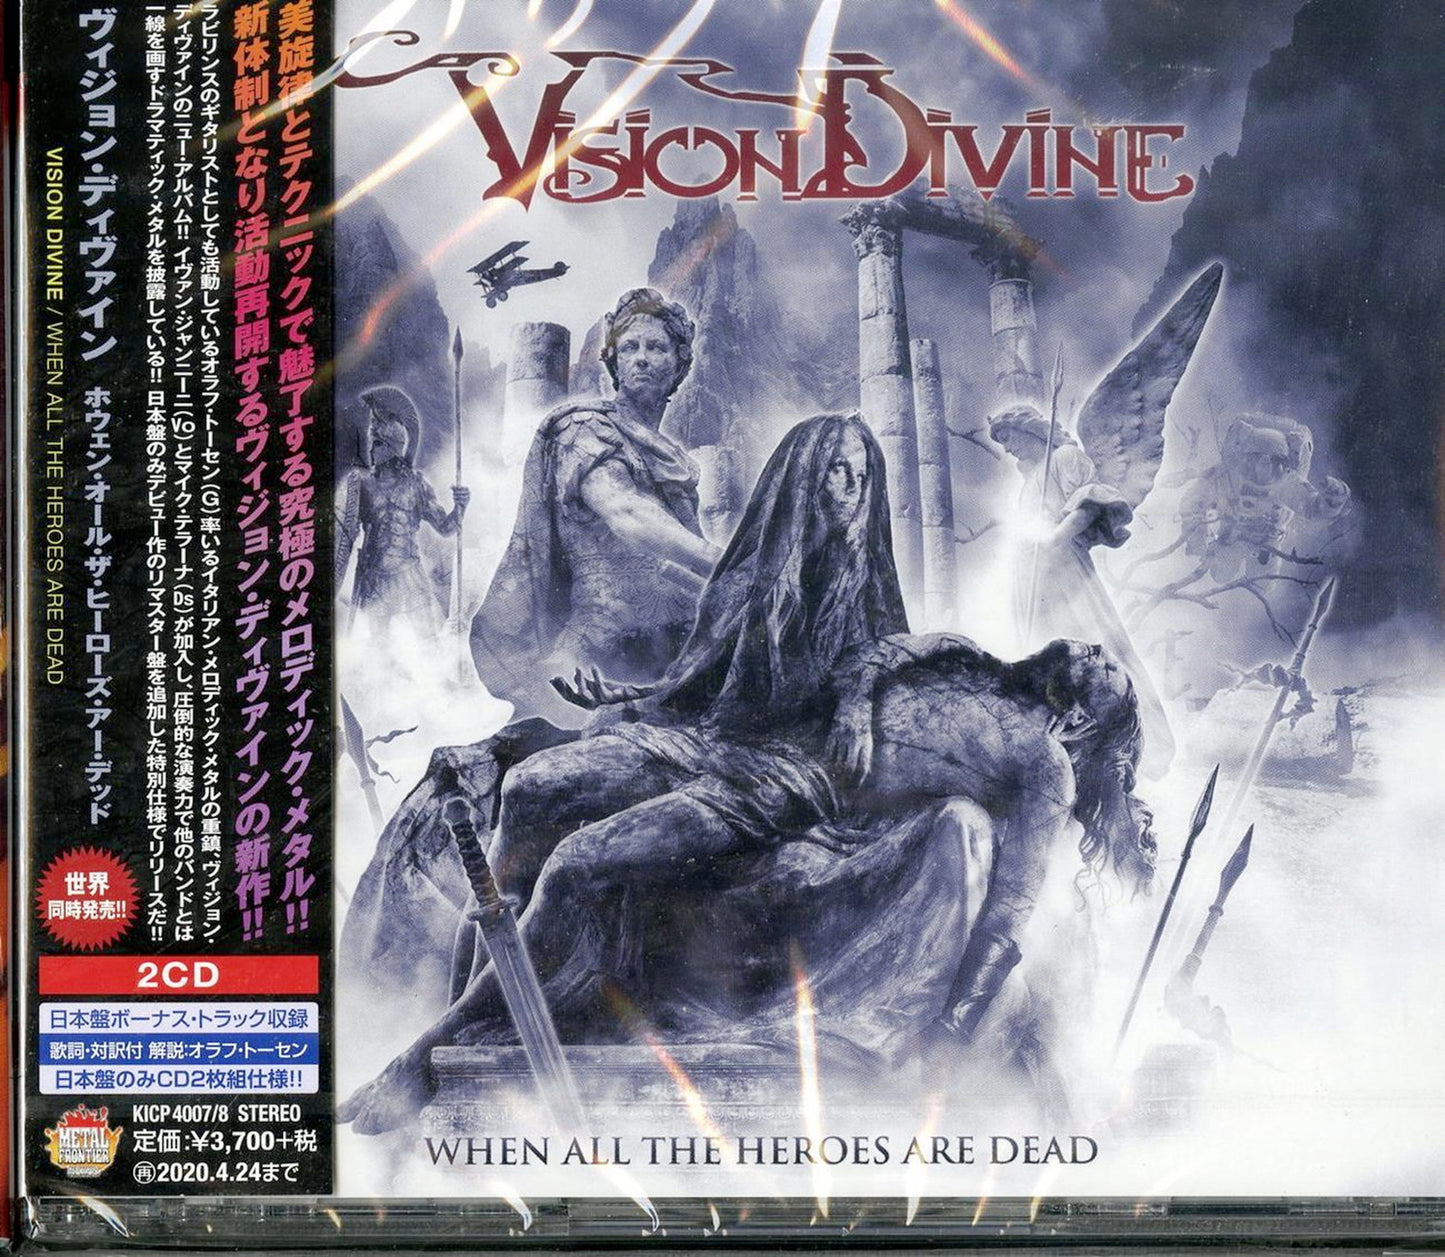 Vision Divine - When All The Heroes Are Dead - Japan  2 CD Bonus Track